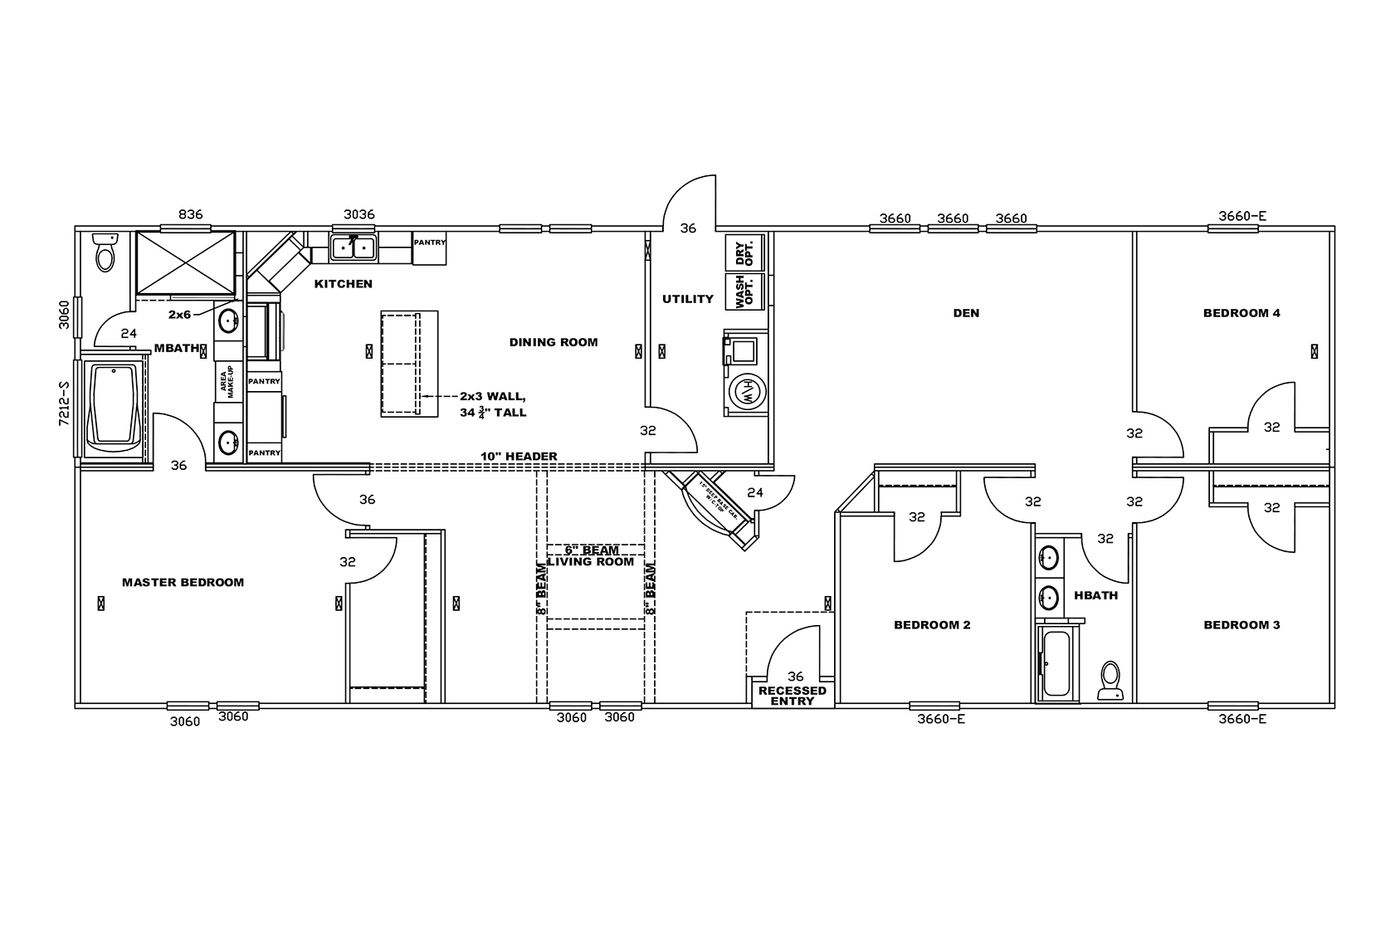 The FRE32764A  FREEDOM XL Floor Plan. This Manufactured Mobile Home features 4 bedrooms and 2 baths.